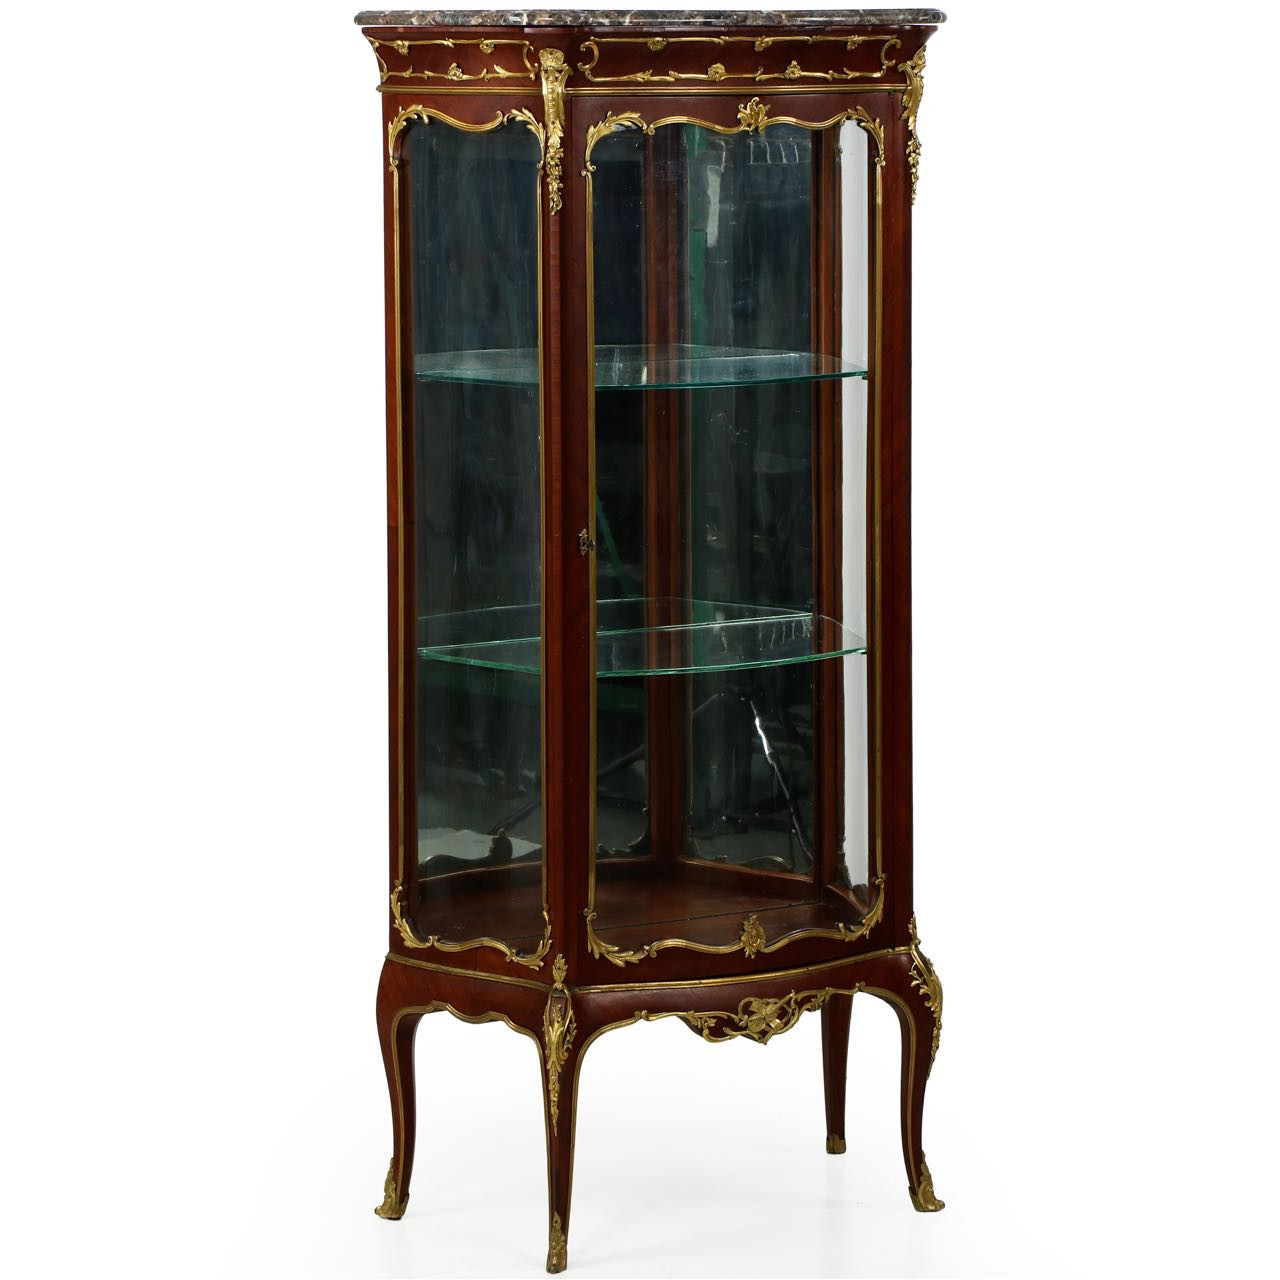 Exquisite French Louis Xv Style Vitrine Display Cabinet C 1880